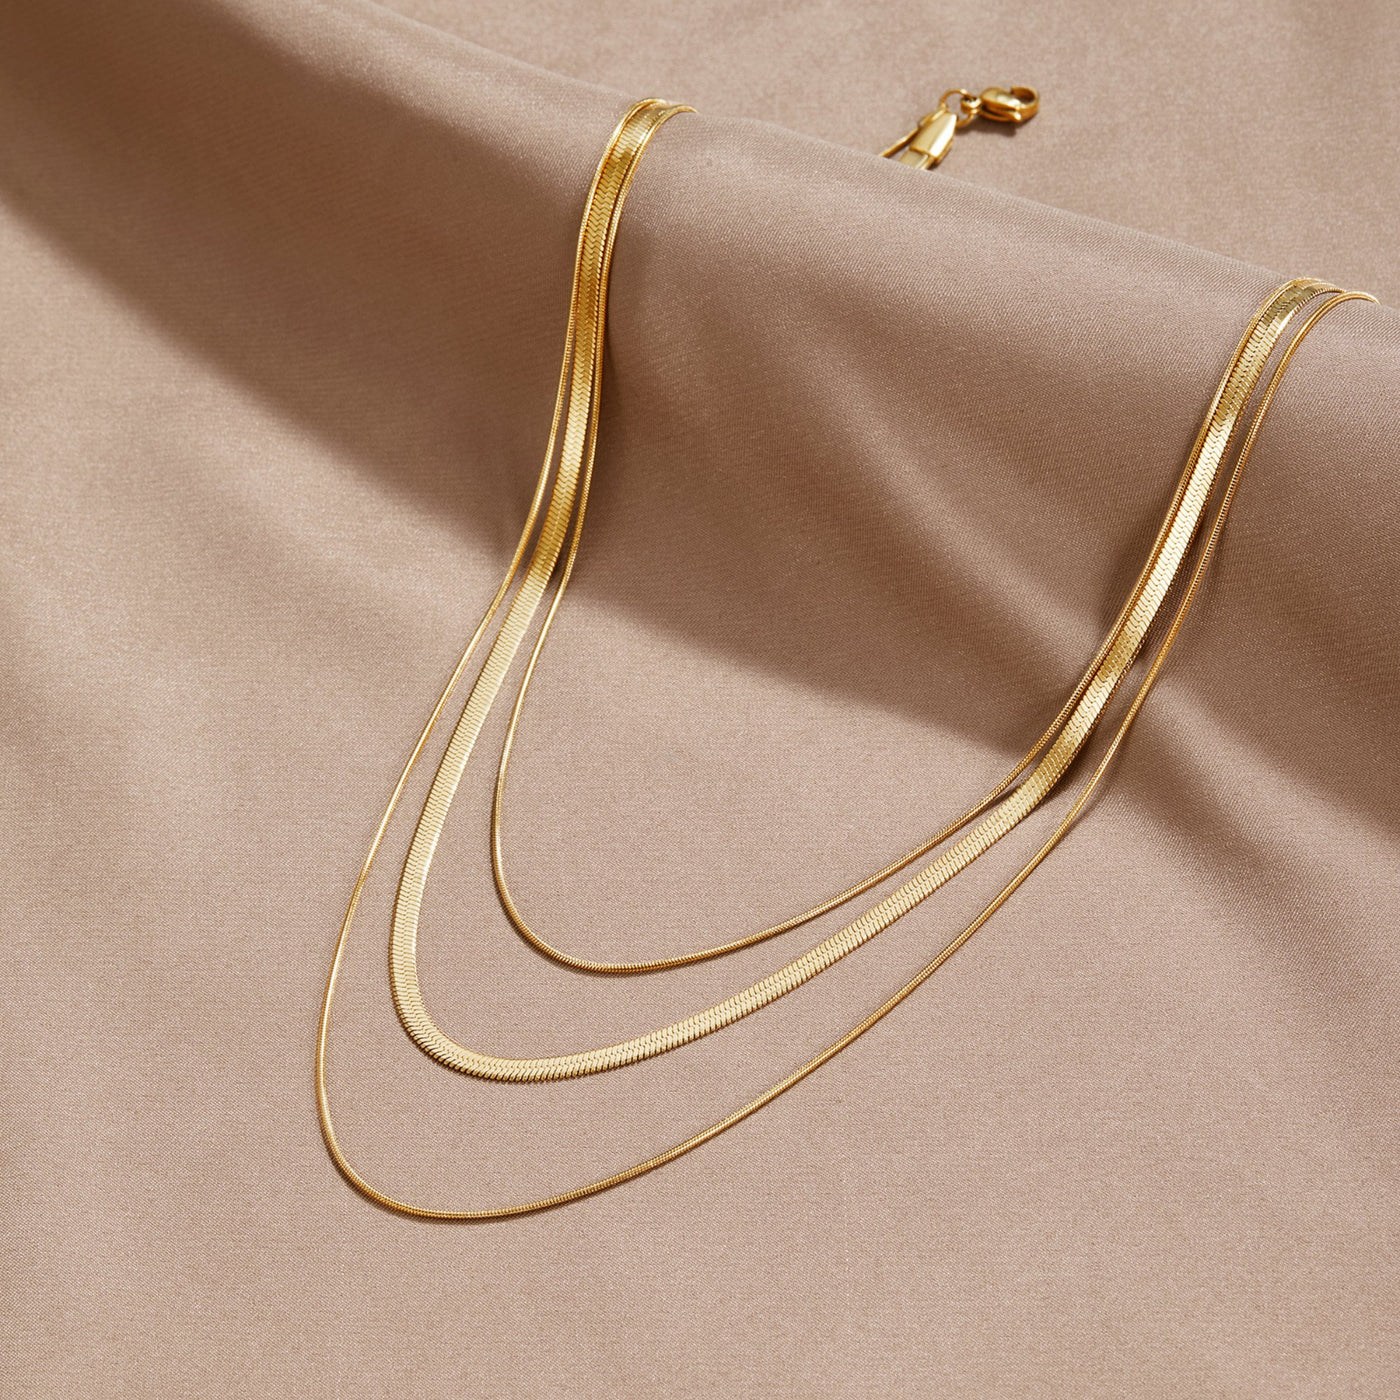 Beautiful Gold Multi-Layered Boutique Earth Necklace Chain –